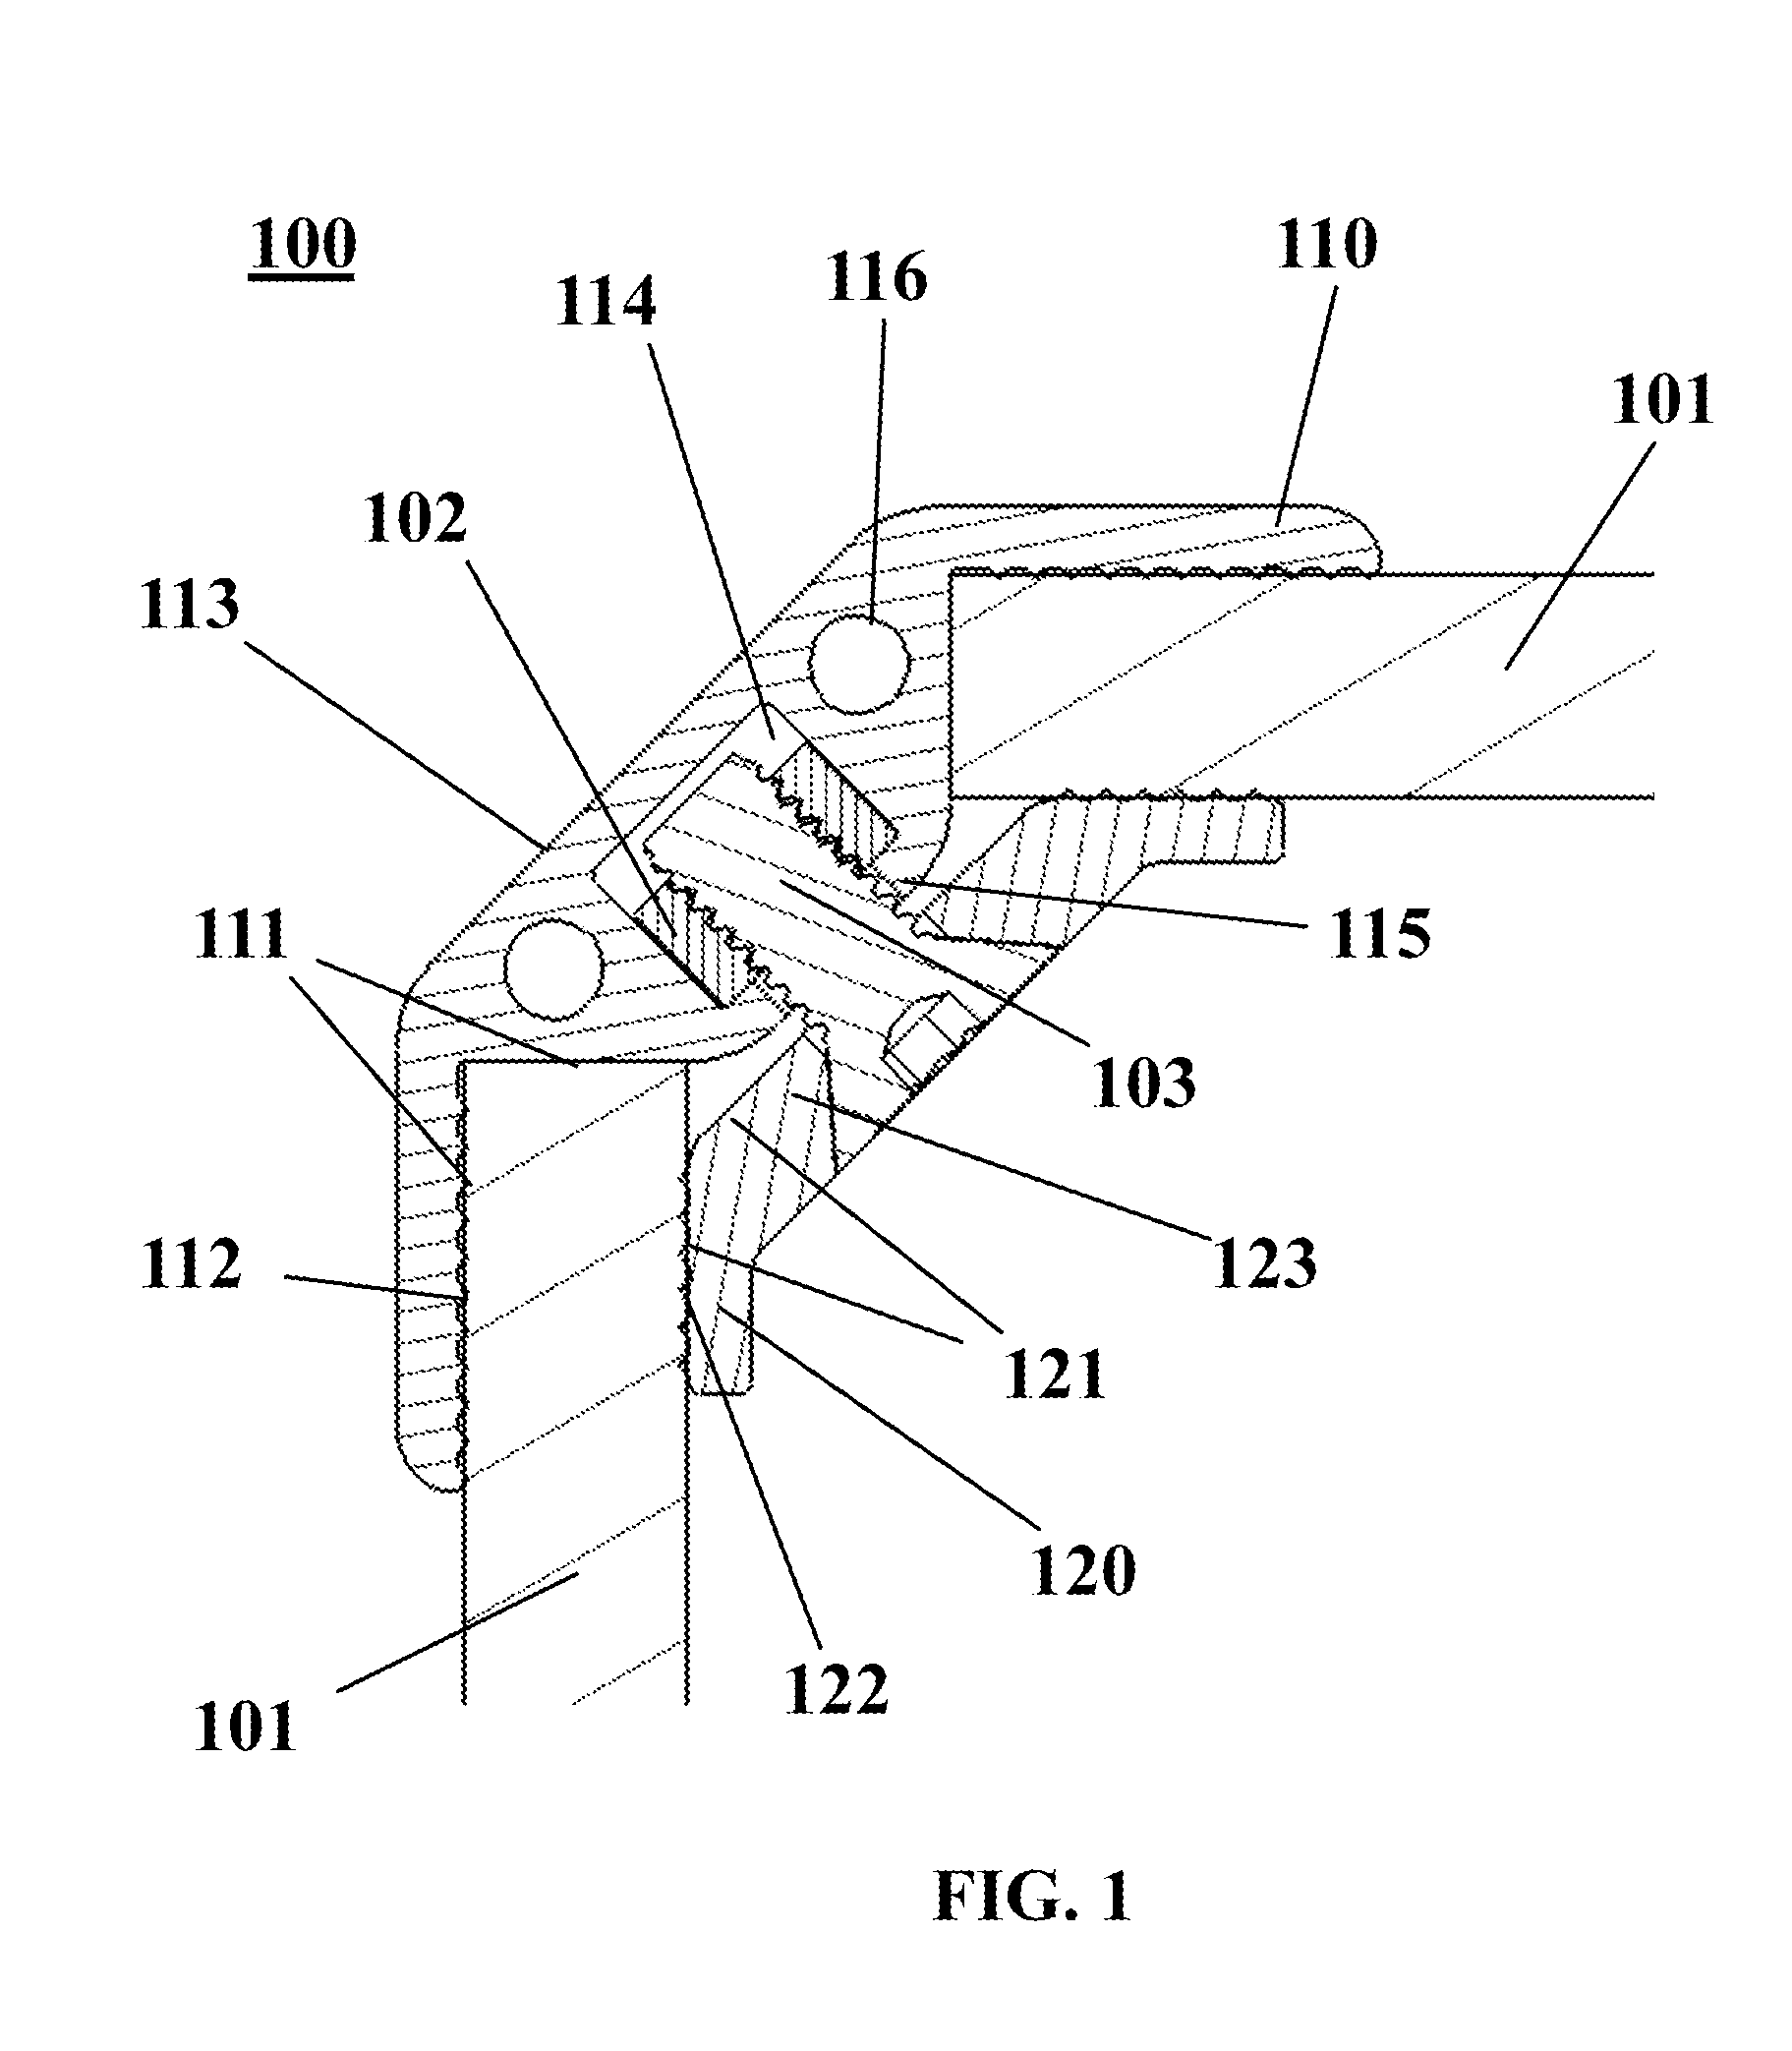 Panel clamp apparatus and system